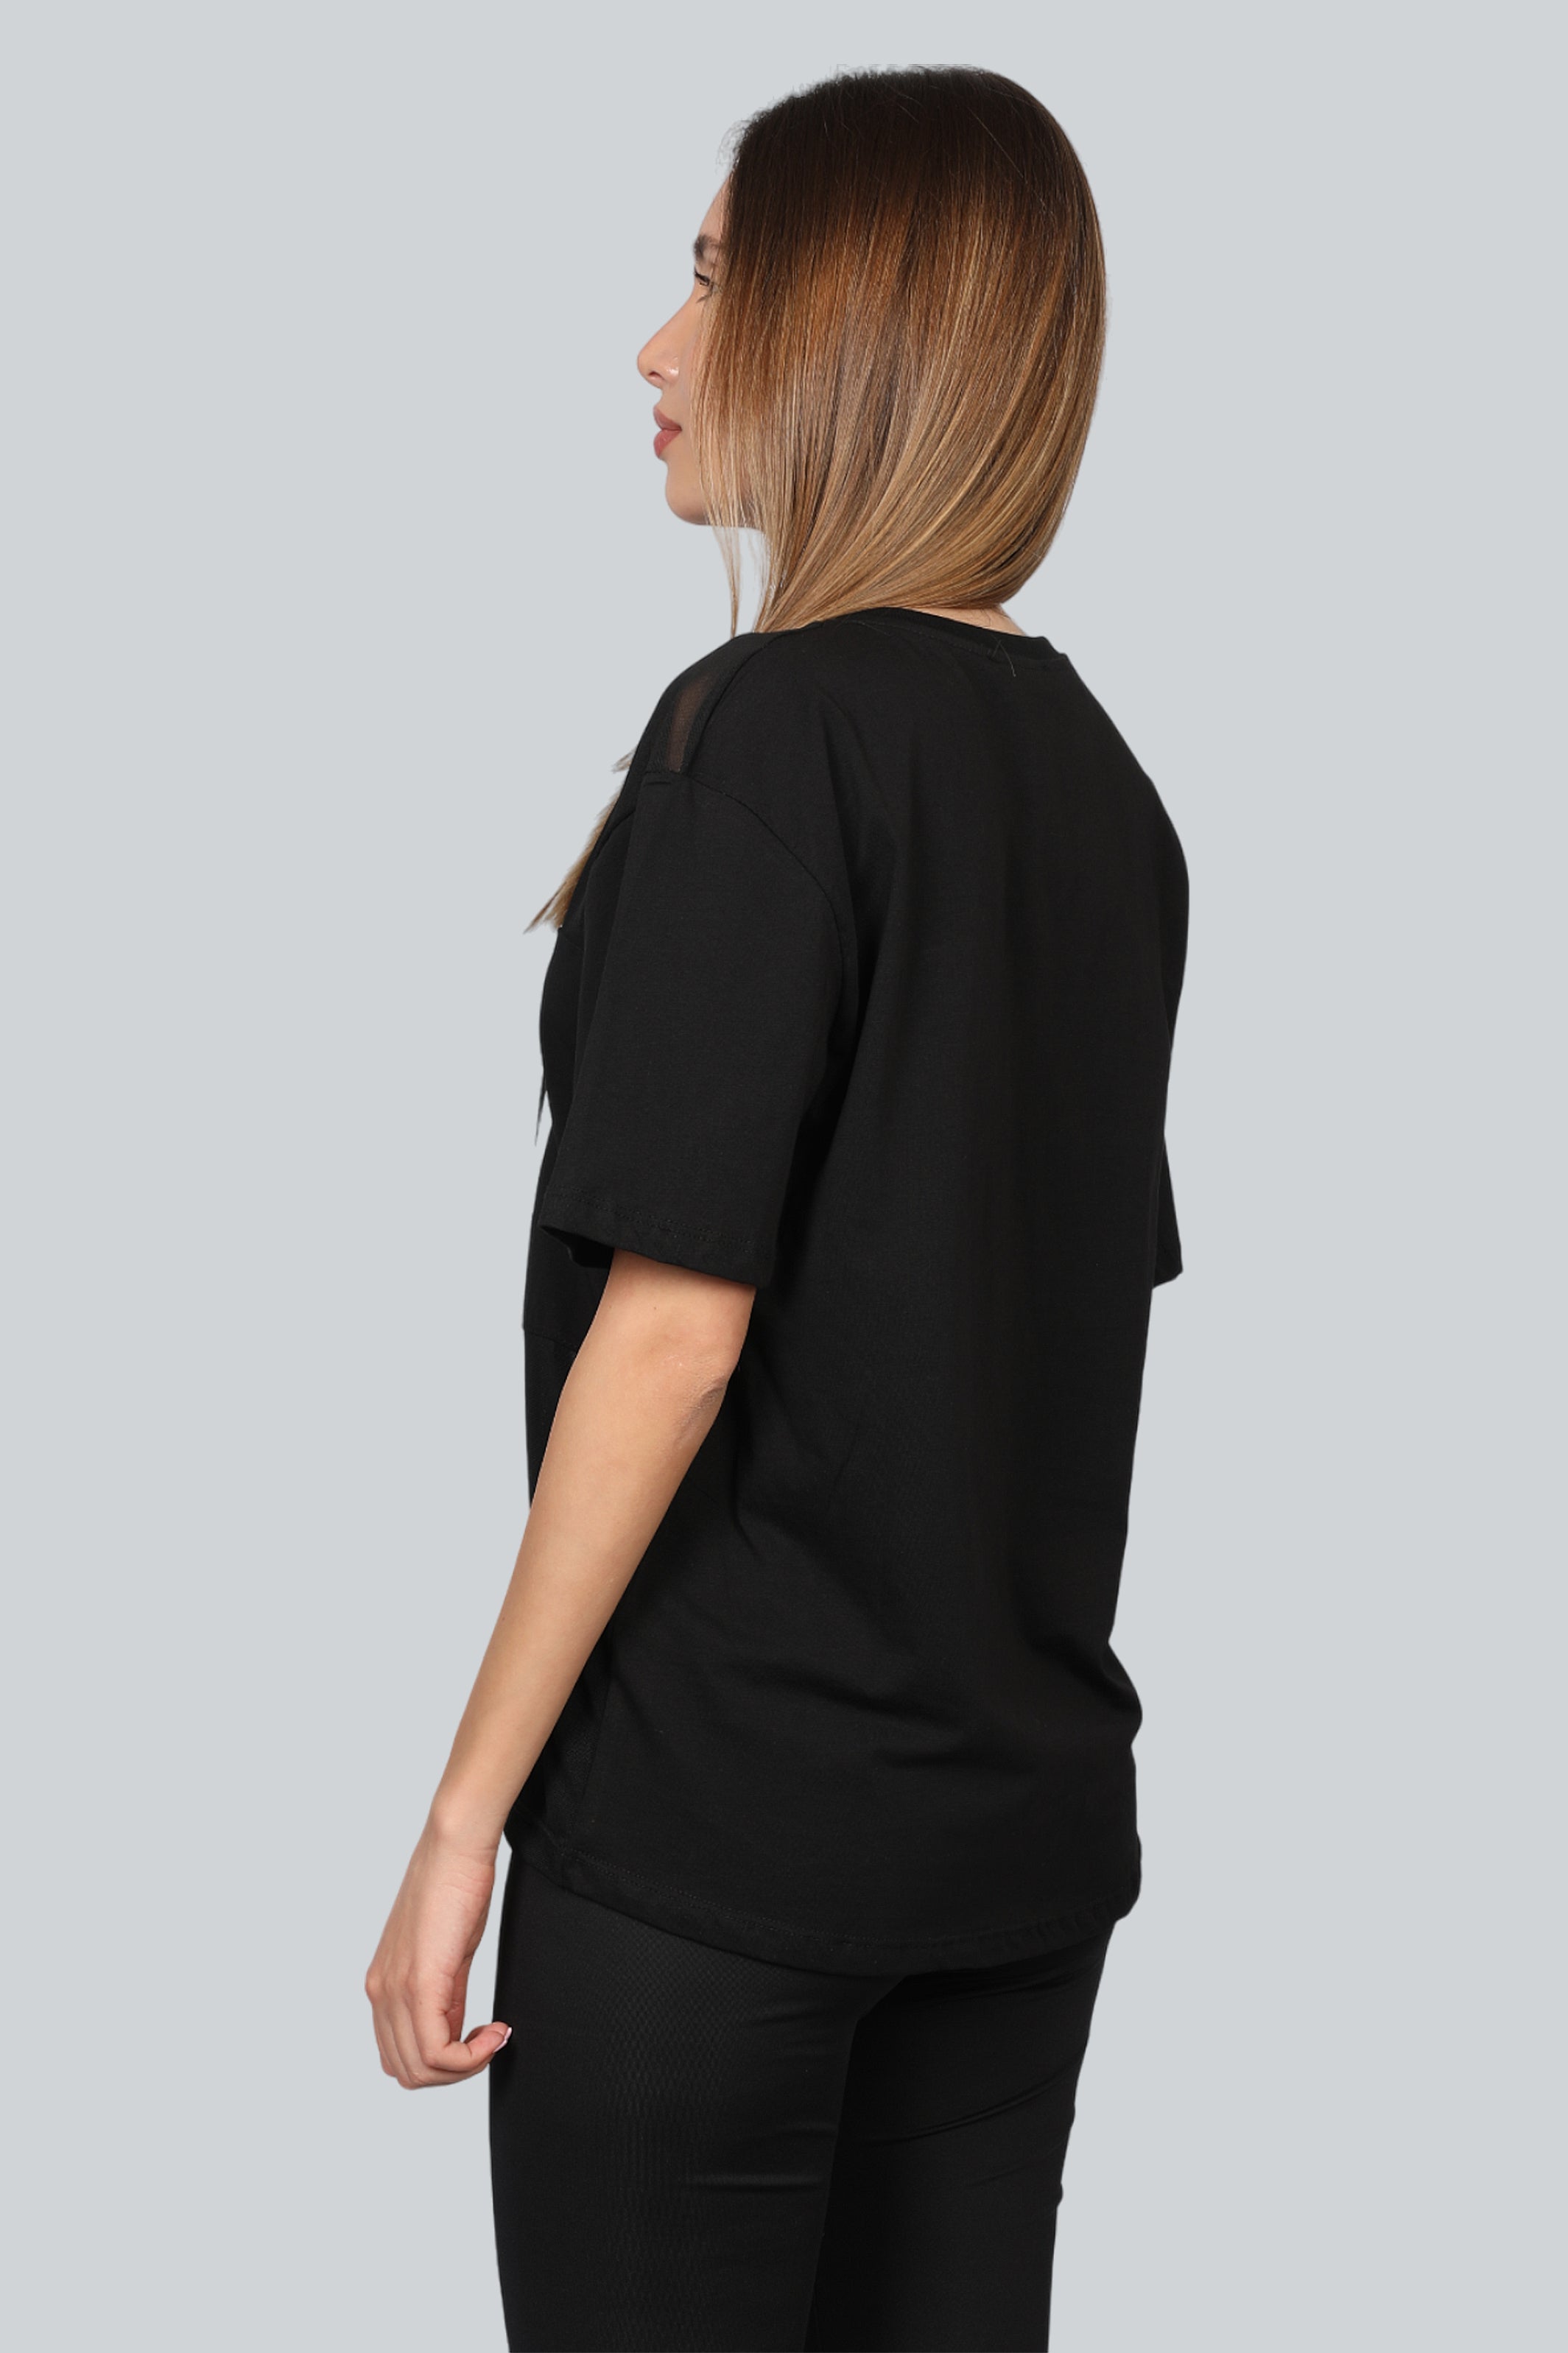 Women Black T-shirt See Throw With "Start" Front Logo